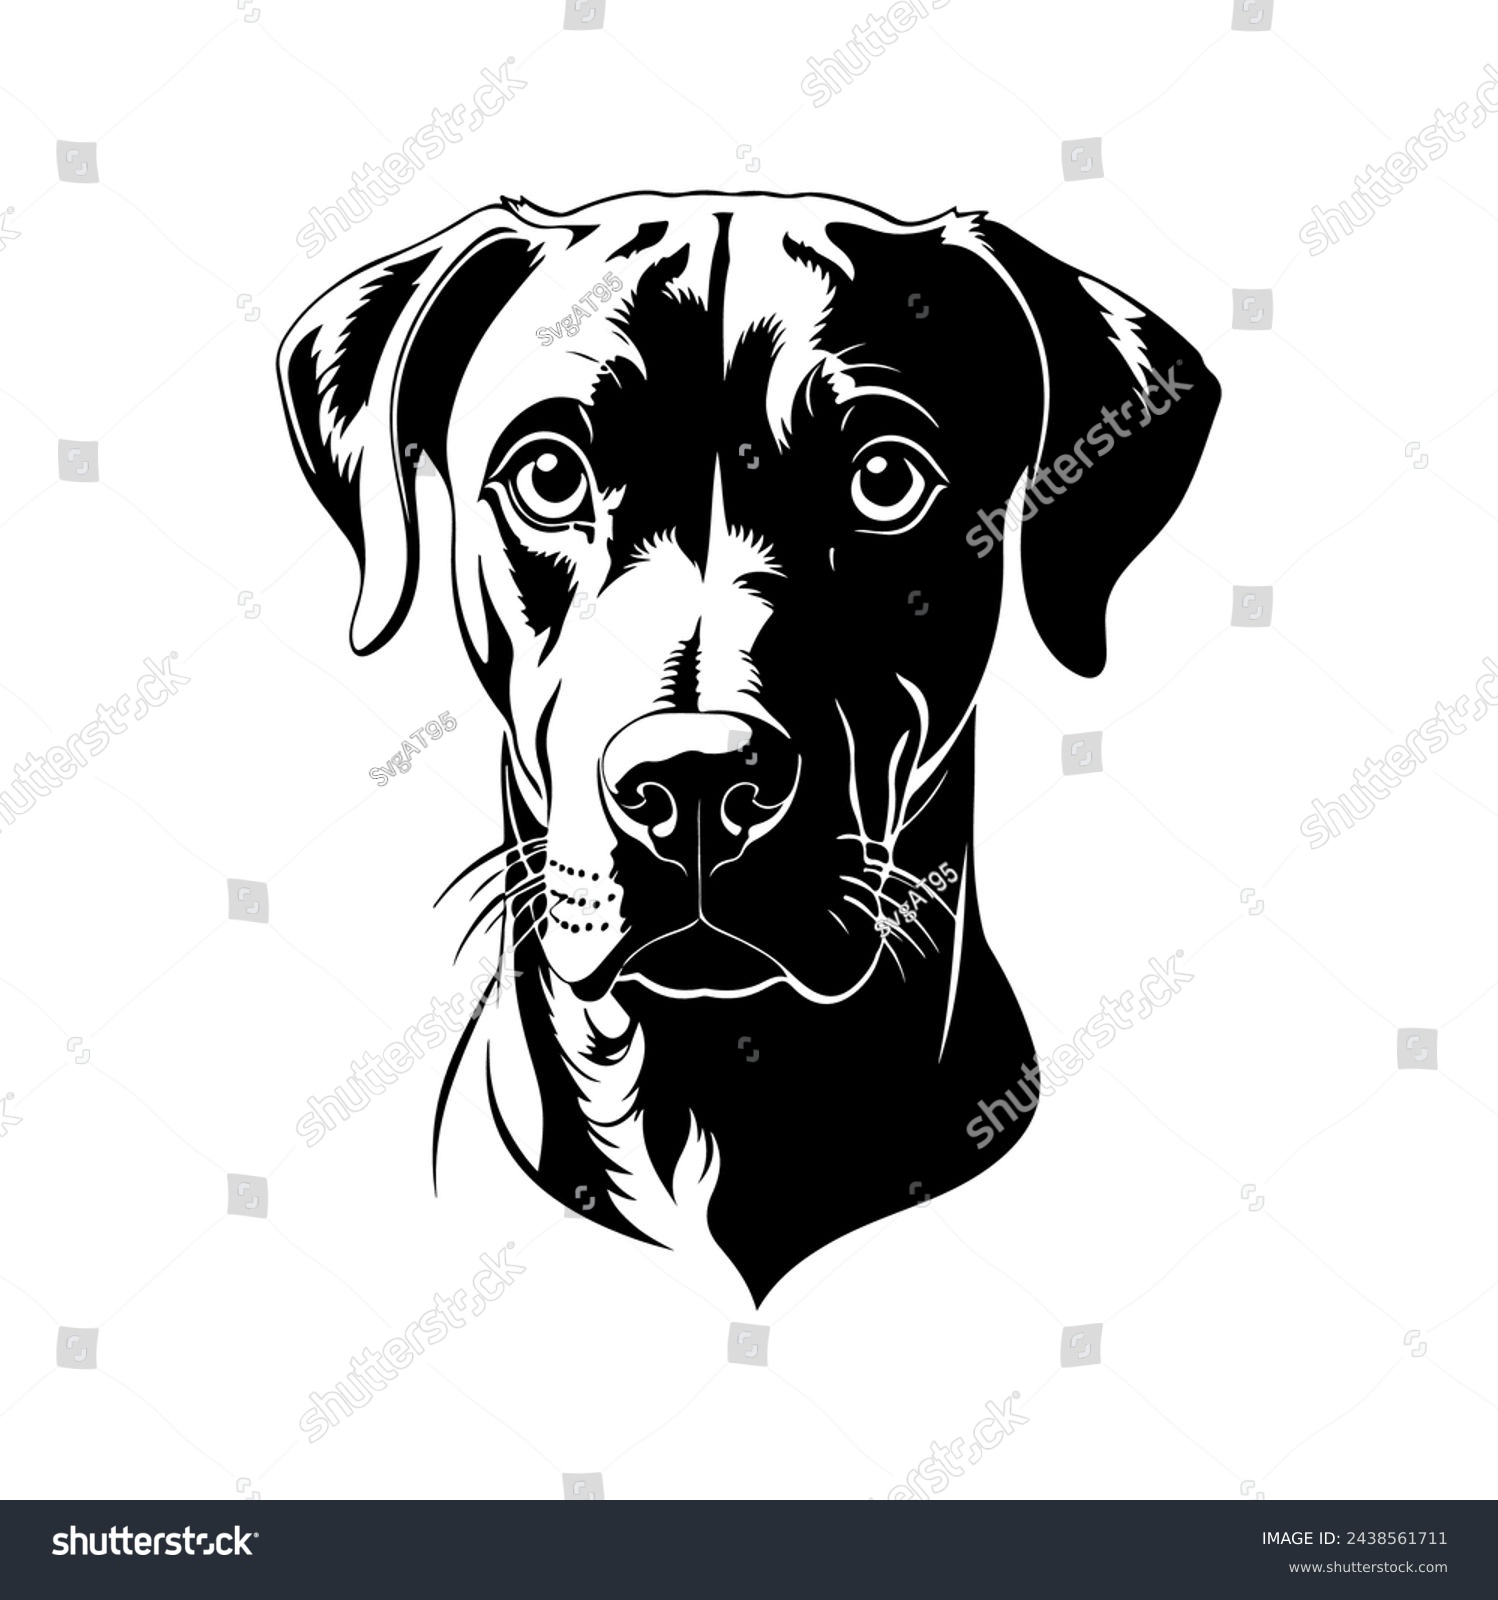 SVG of Portrait of a Rhodesian Ridgeback Dog Vector isolated on white background, Dog Silhouettes. svg